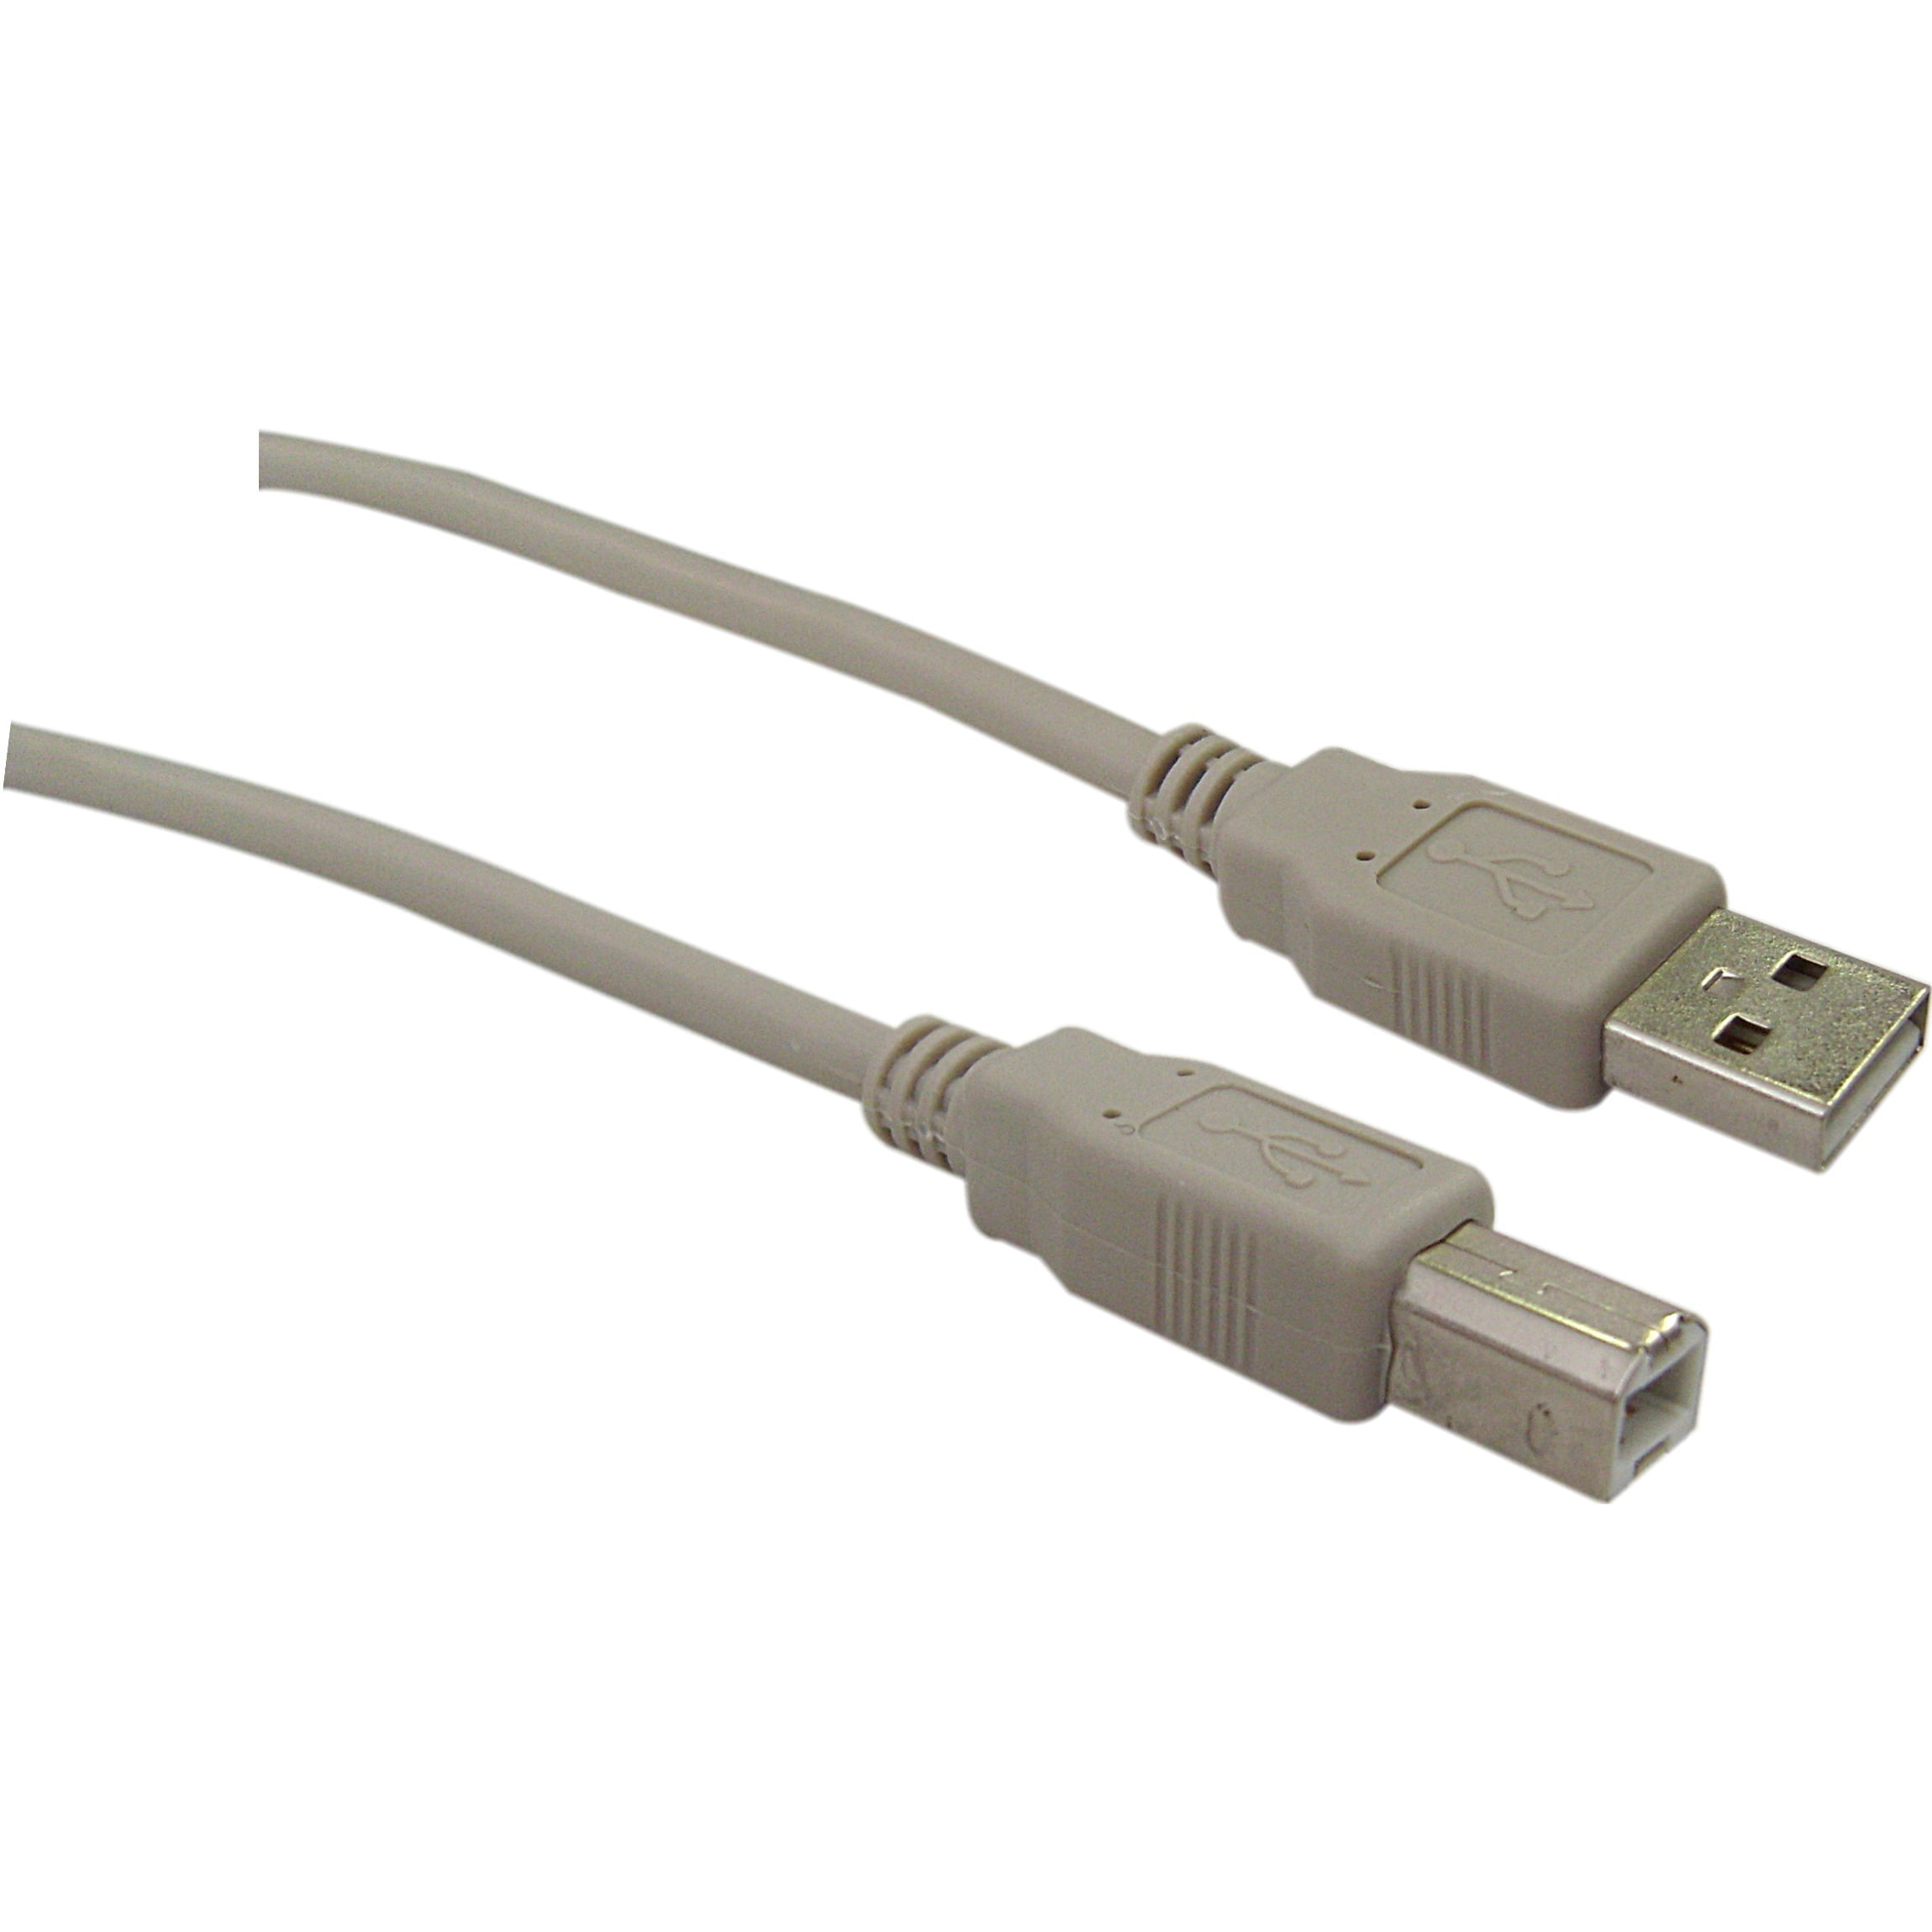 Cable Wholesale 10U2-02201 USB 2.0 Printer & Device Cable, Type A Male ...